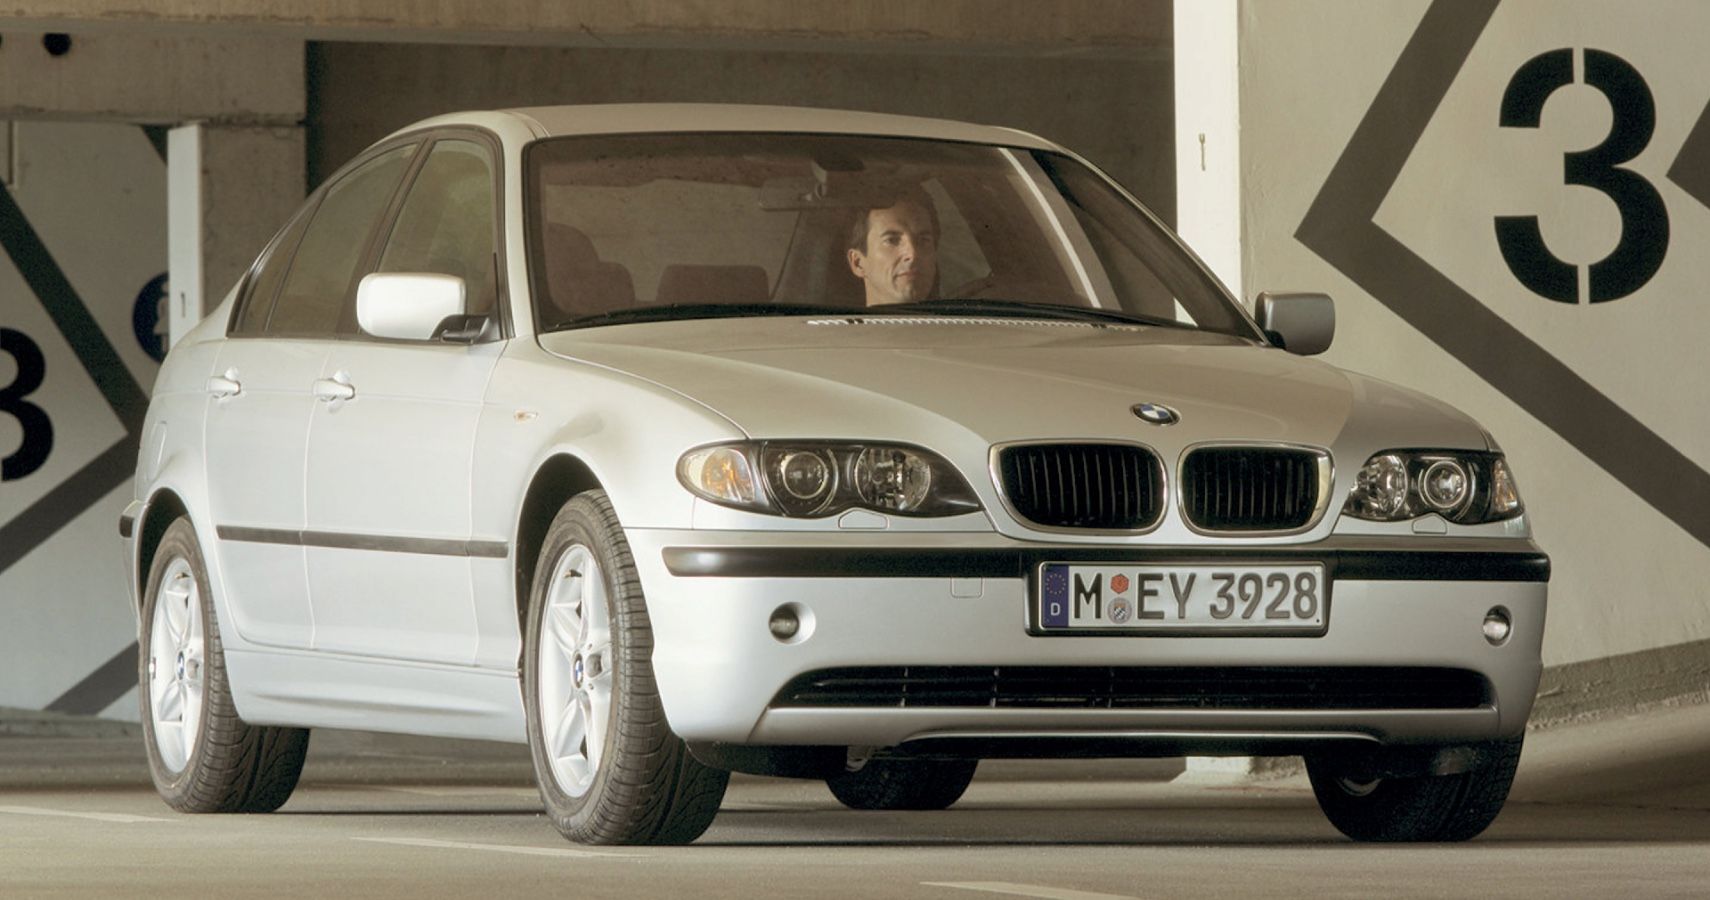 BMW Says Keeping Your Old Car Could Be Better Than Buying New One